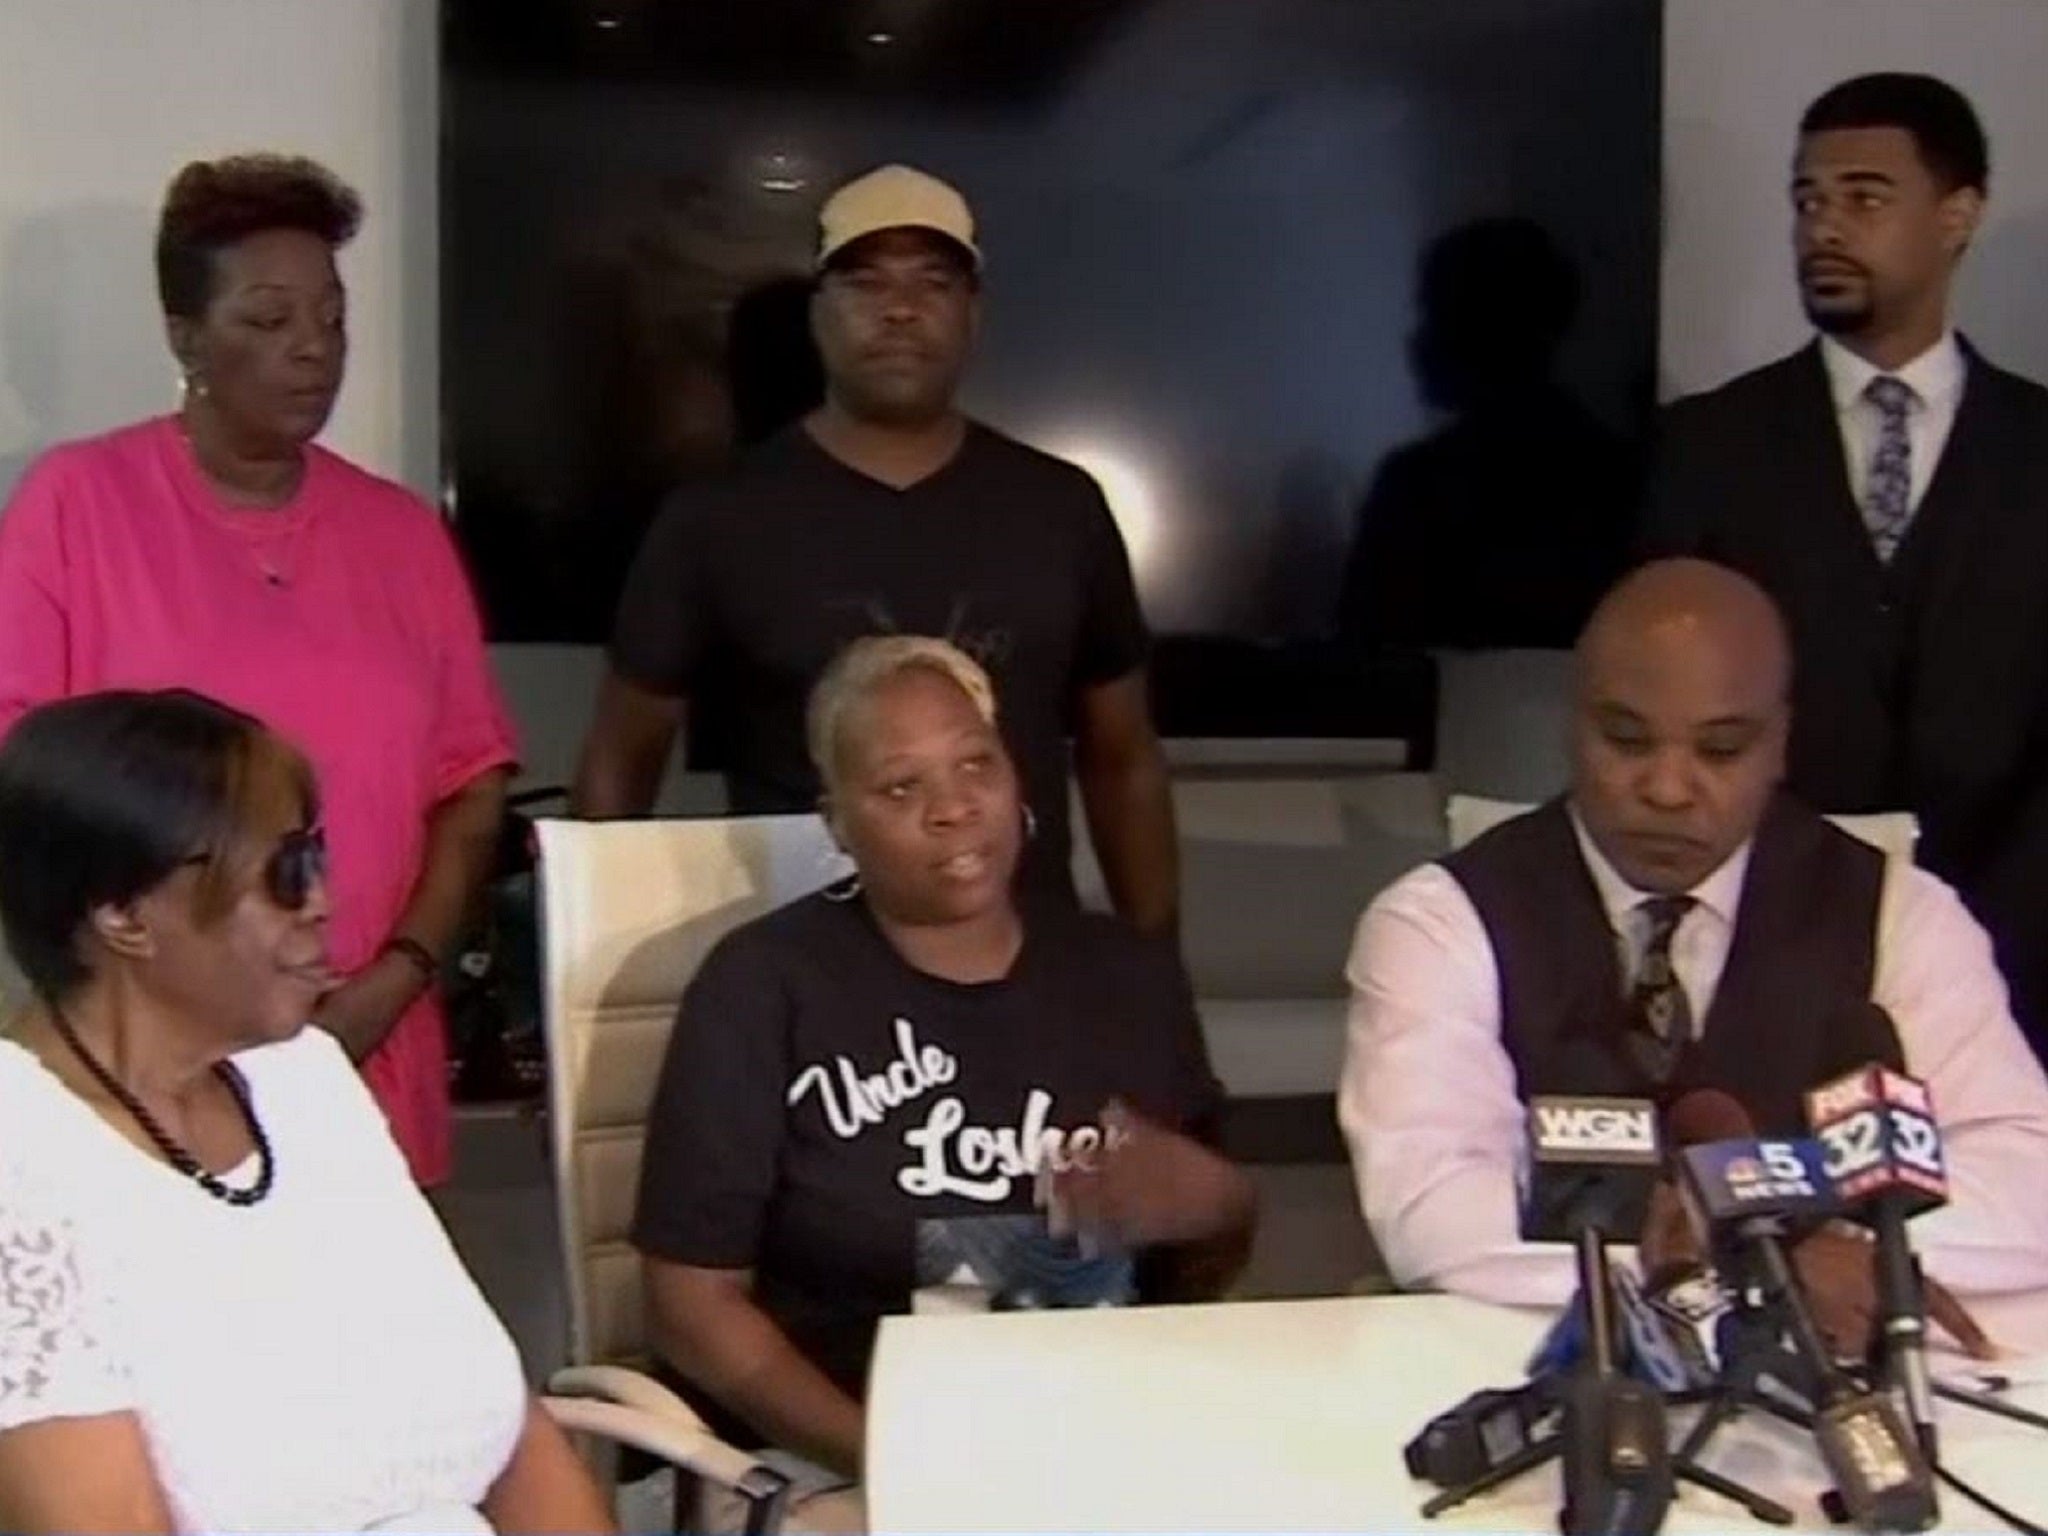 The families of Elisha Brittman and Alfonso Bennett speak during a press conference on 3 July 2019. Still image taken from video by NBC Chicago.